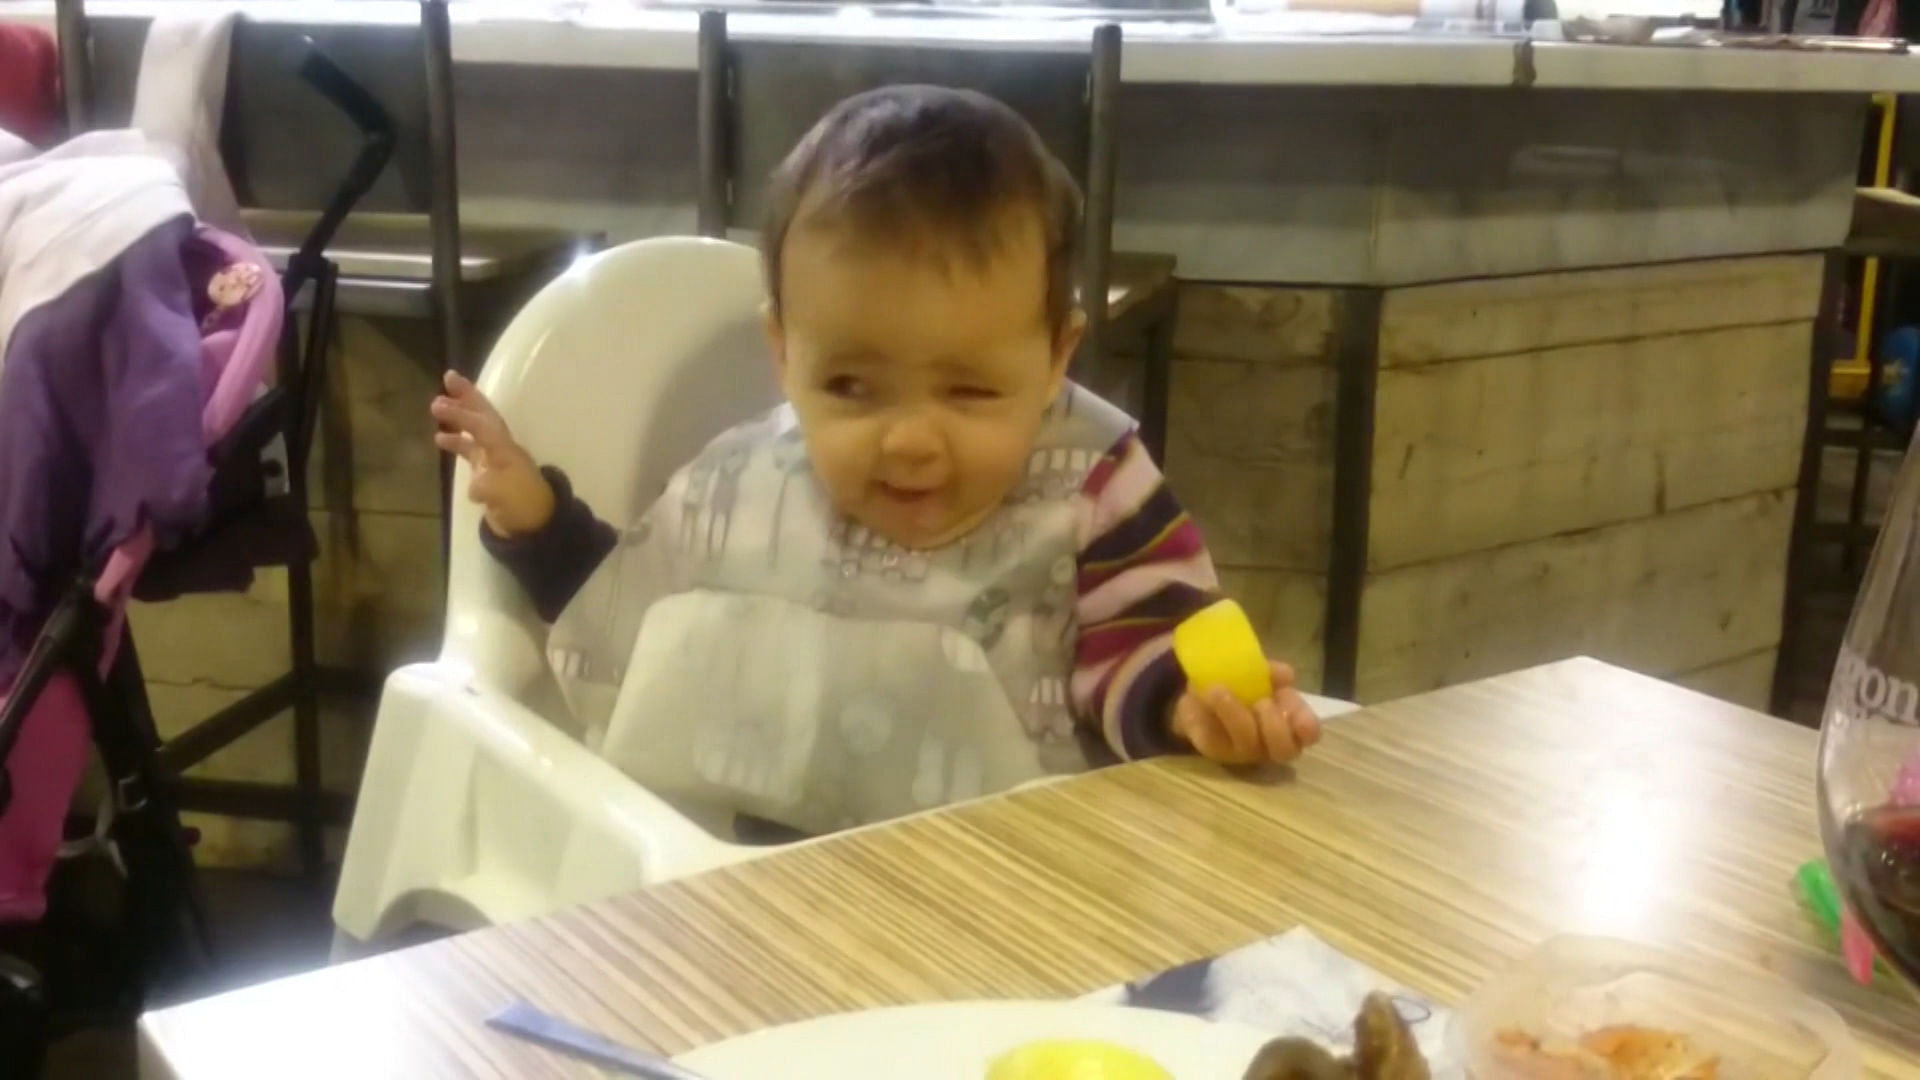 Watch this baby’s hilarious reaction after trying a lemon for the first time. (Photo: AP screengrab)